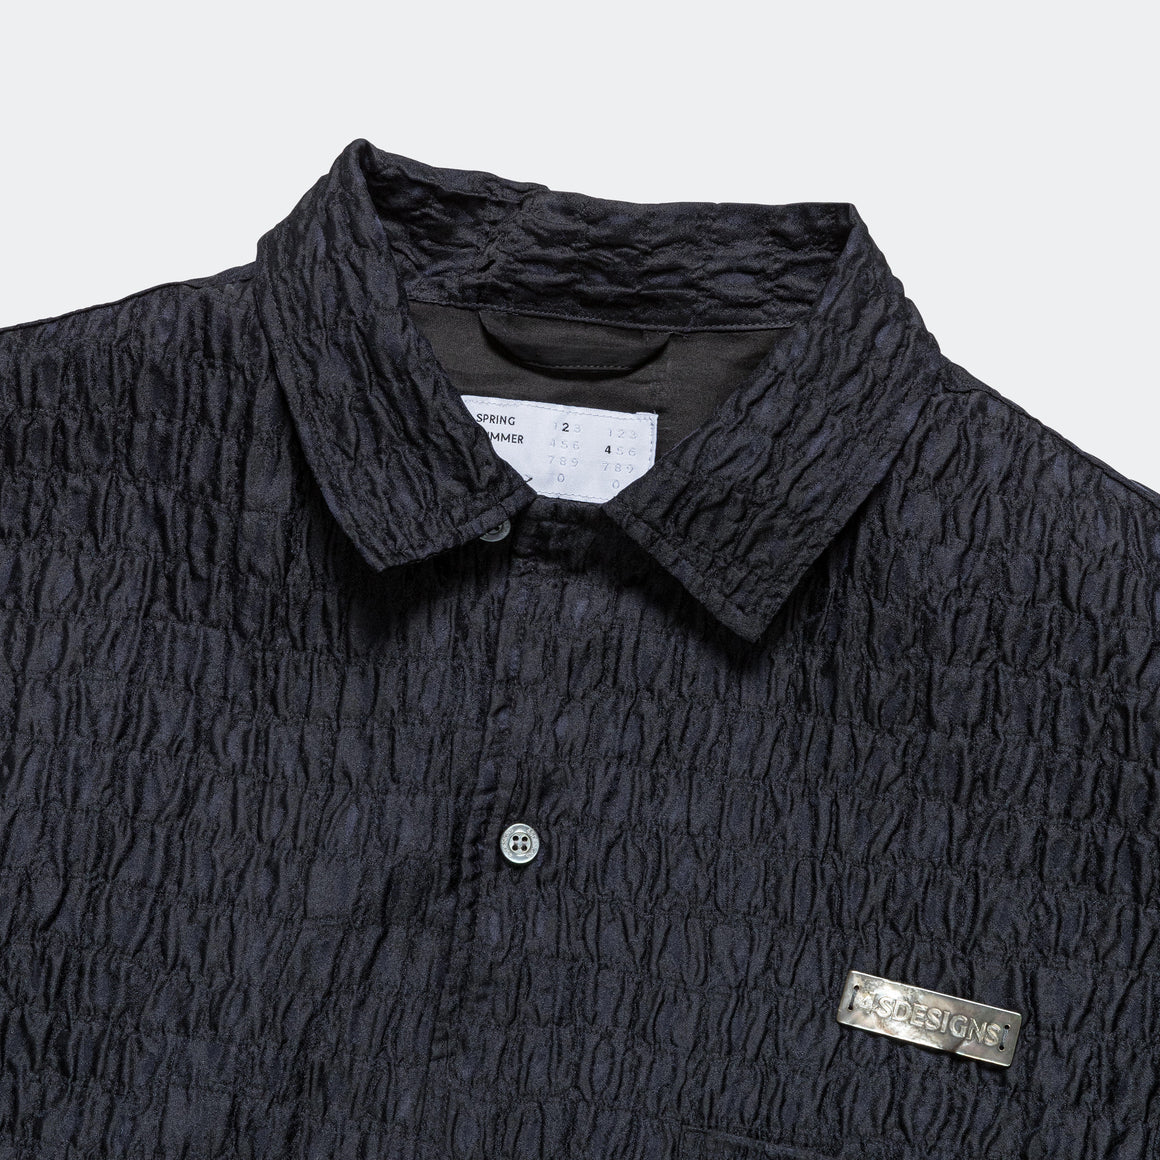 4SDesigns - Wide Camp Shirt - Navy Silk/Poly Croc Jacquard Navy - UP THERE